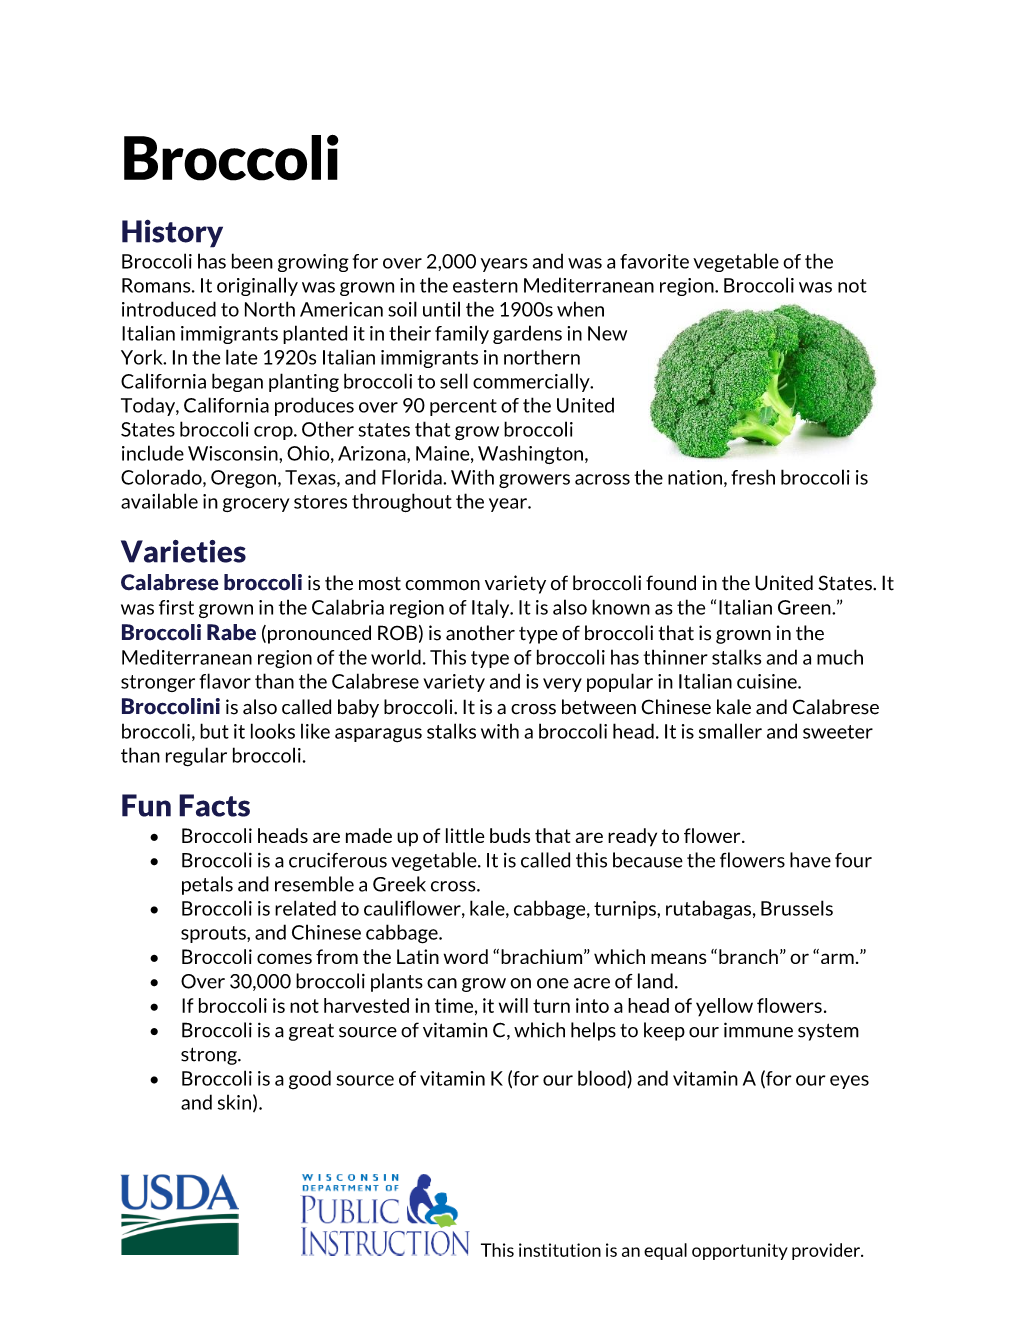 Broccoli History Broccoli Has Been Growing for Over 2,000 Years and Was a Favorite Vegetable of the Romans